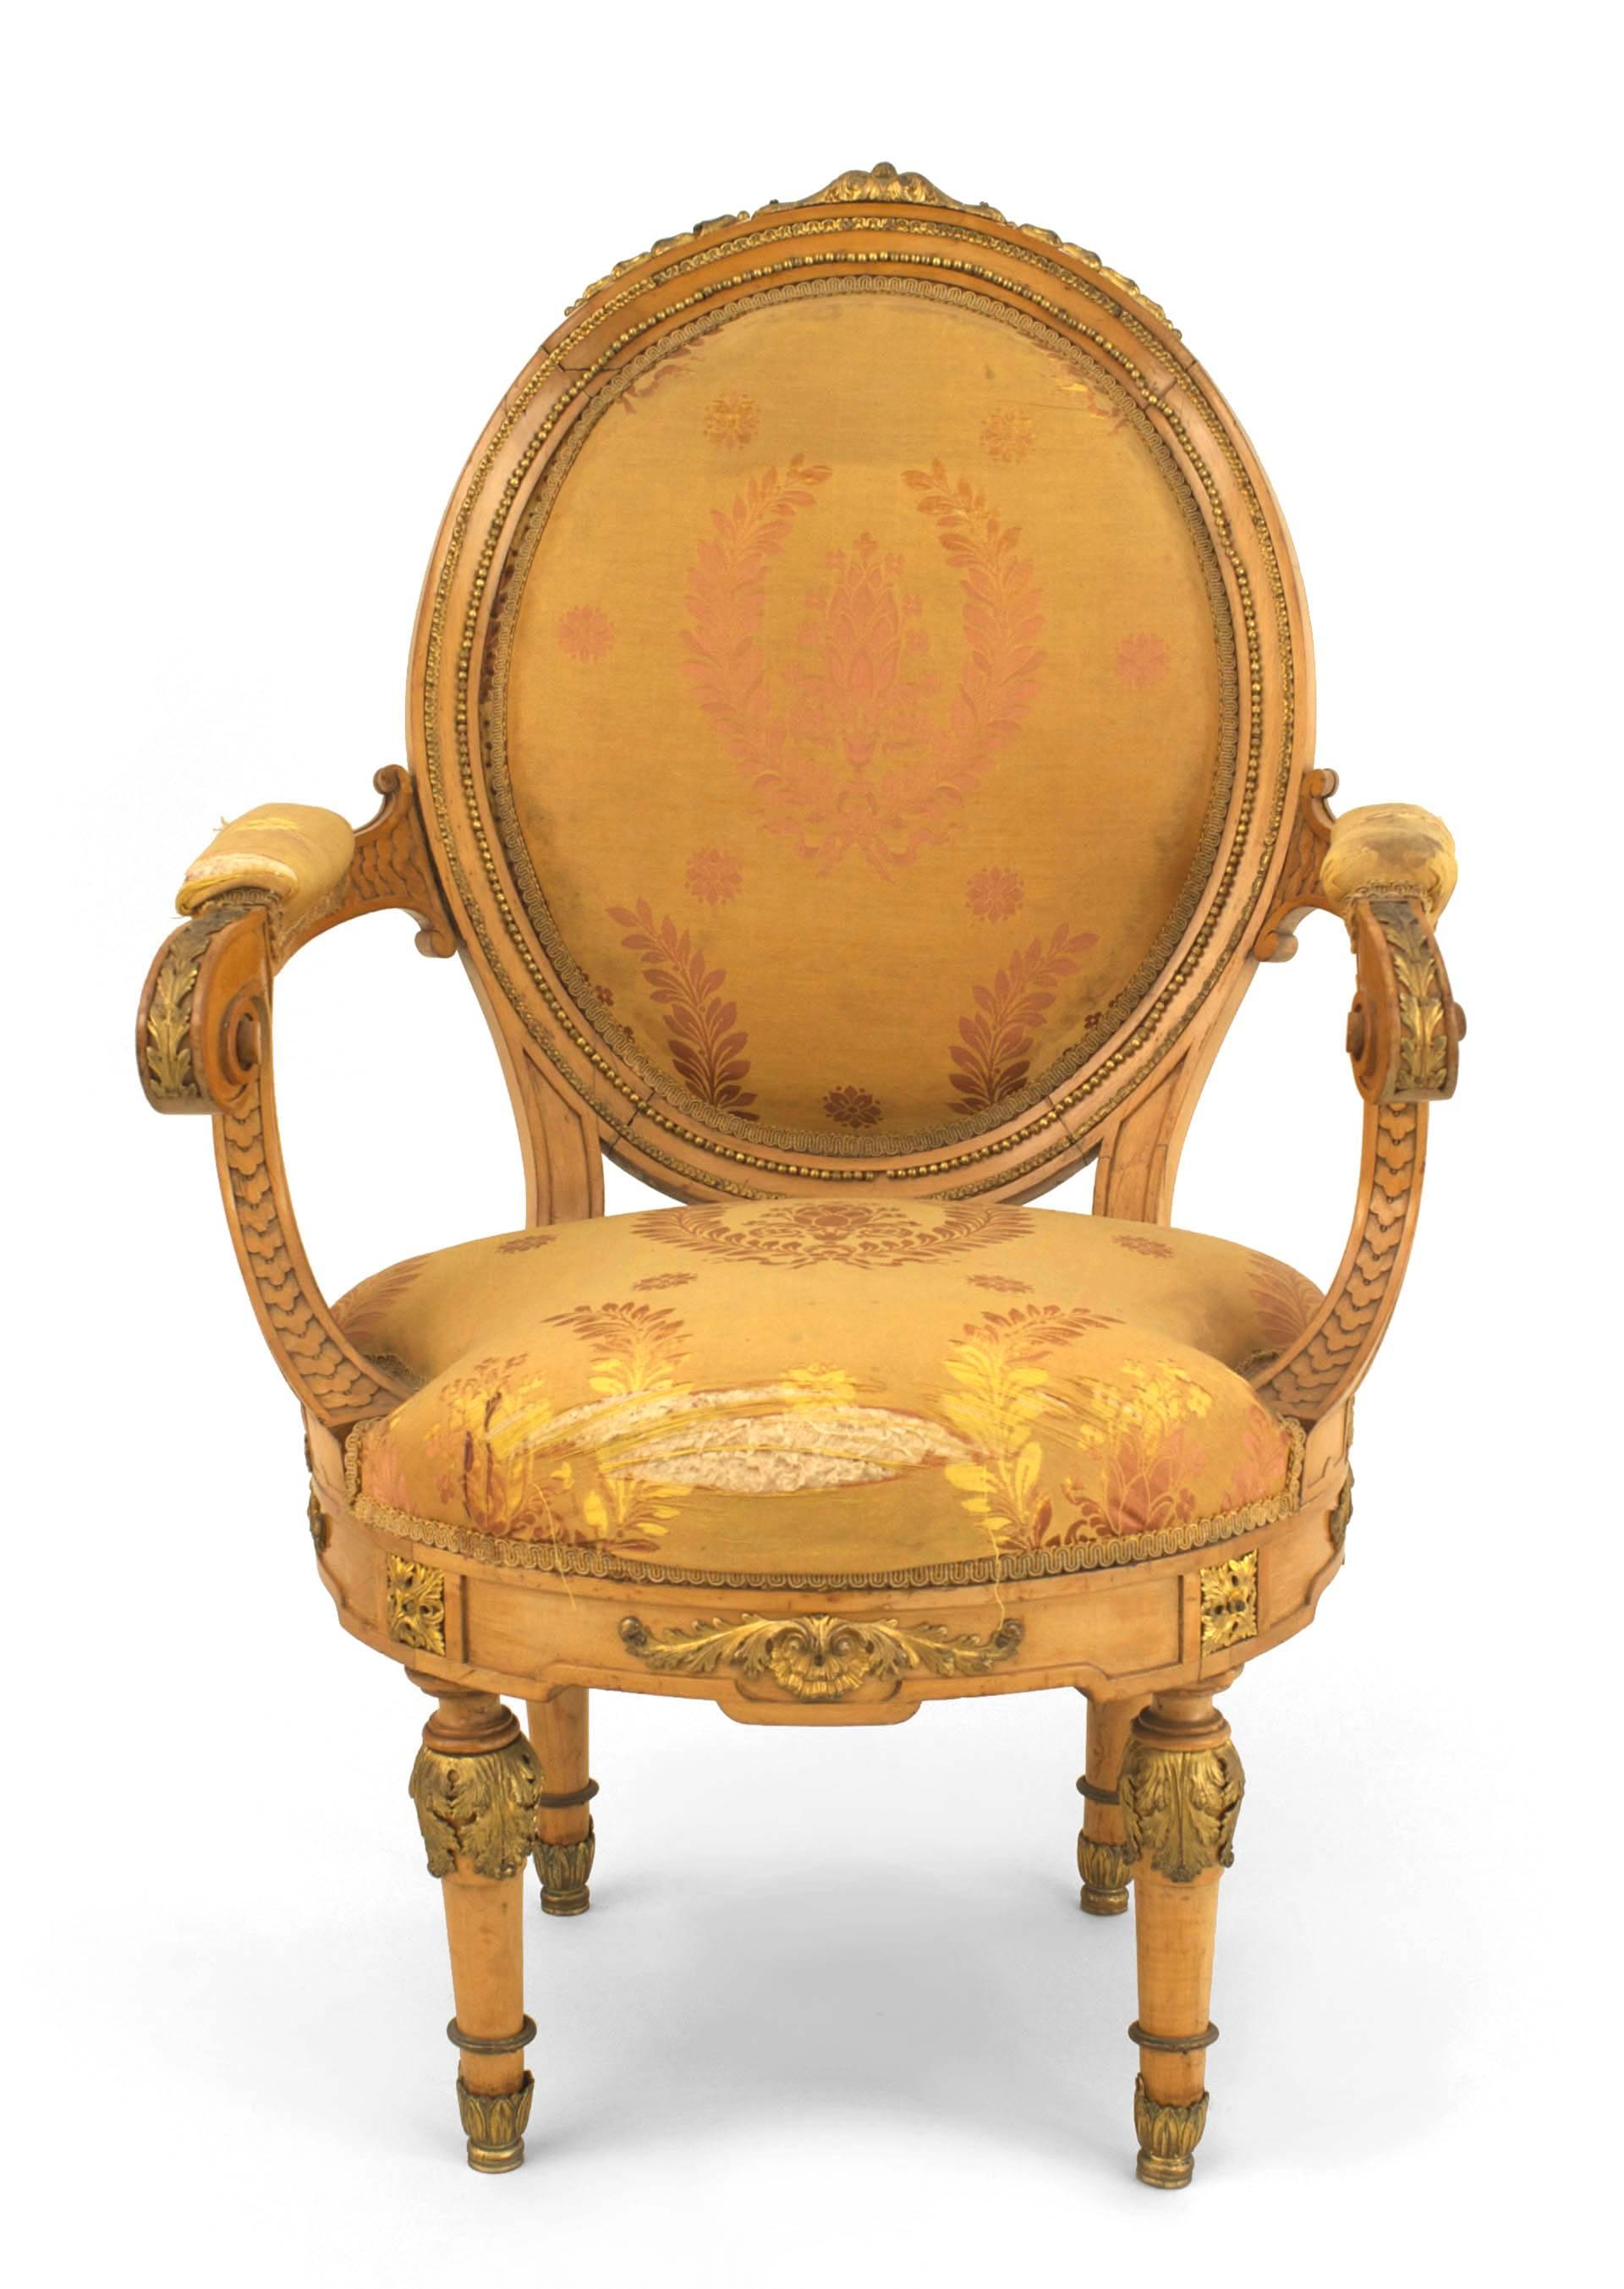 Pair of French Louis XVI style gilt metal mounted sycamore fauteuils (open Armchairs) with oval yellow silk damask upholstered back & seat (early 20th Cent)
